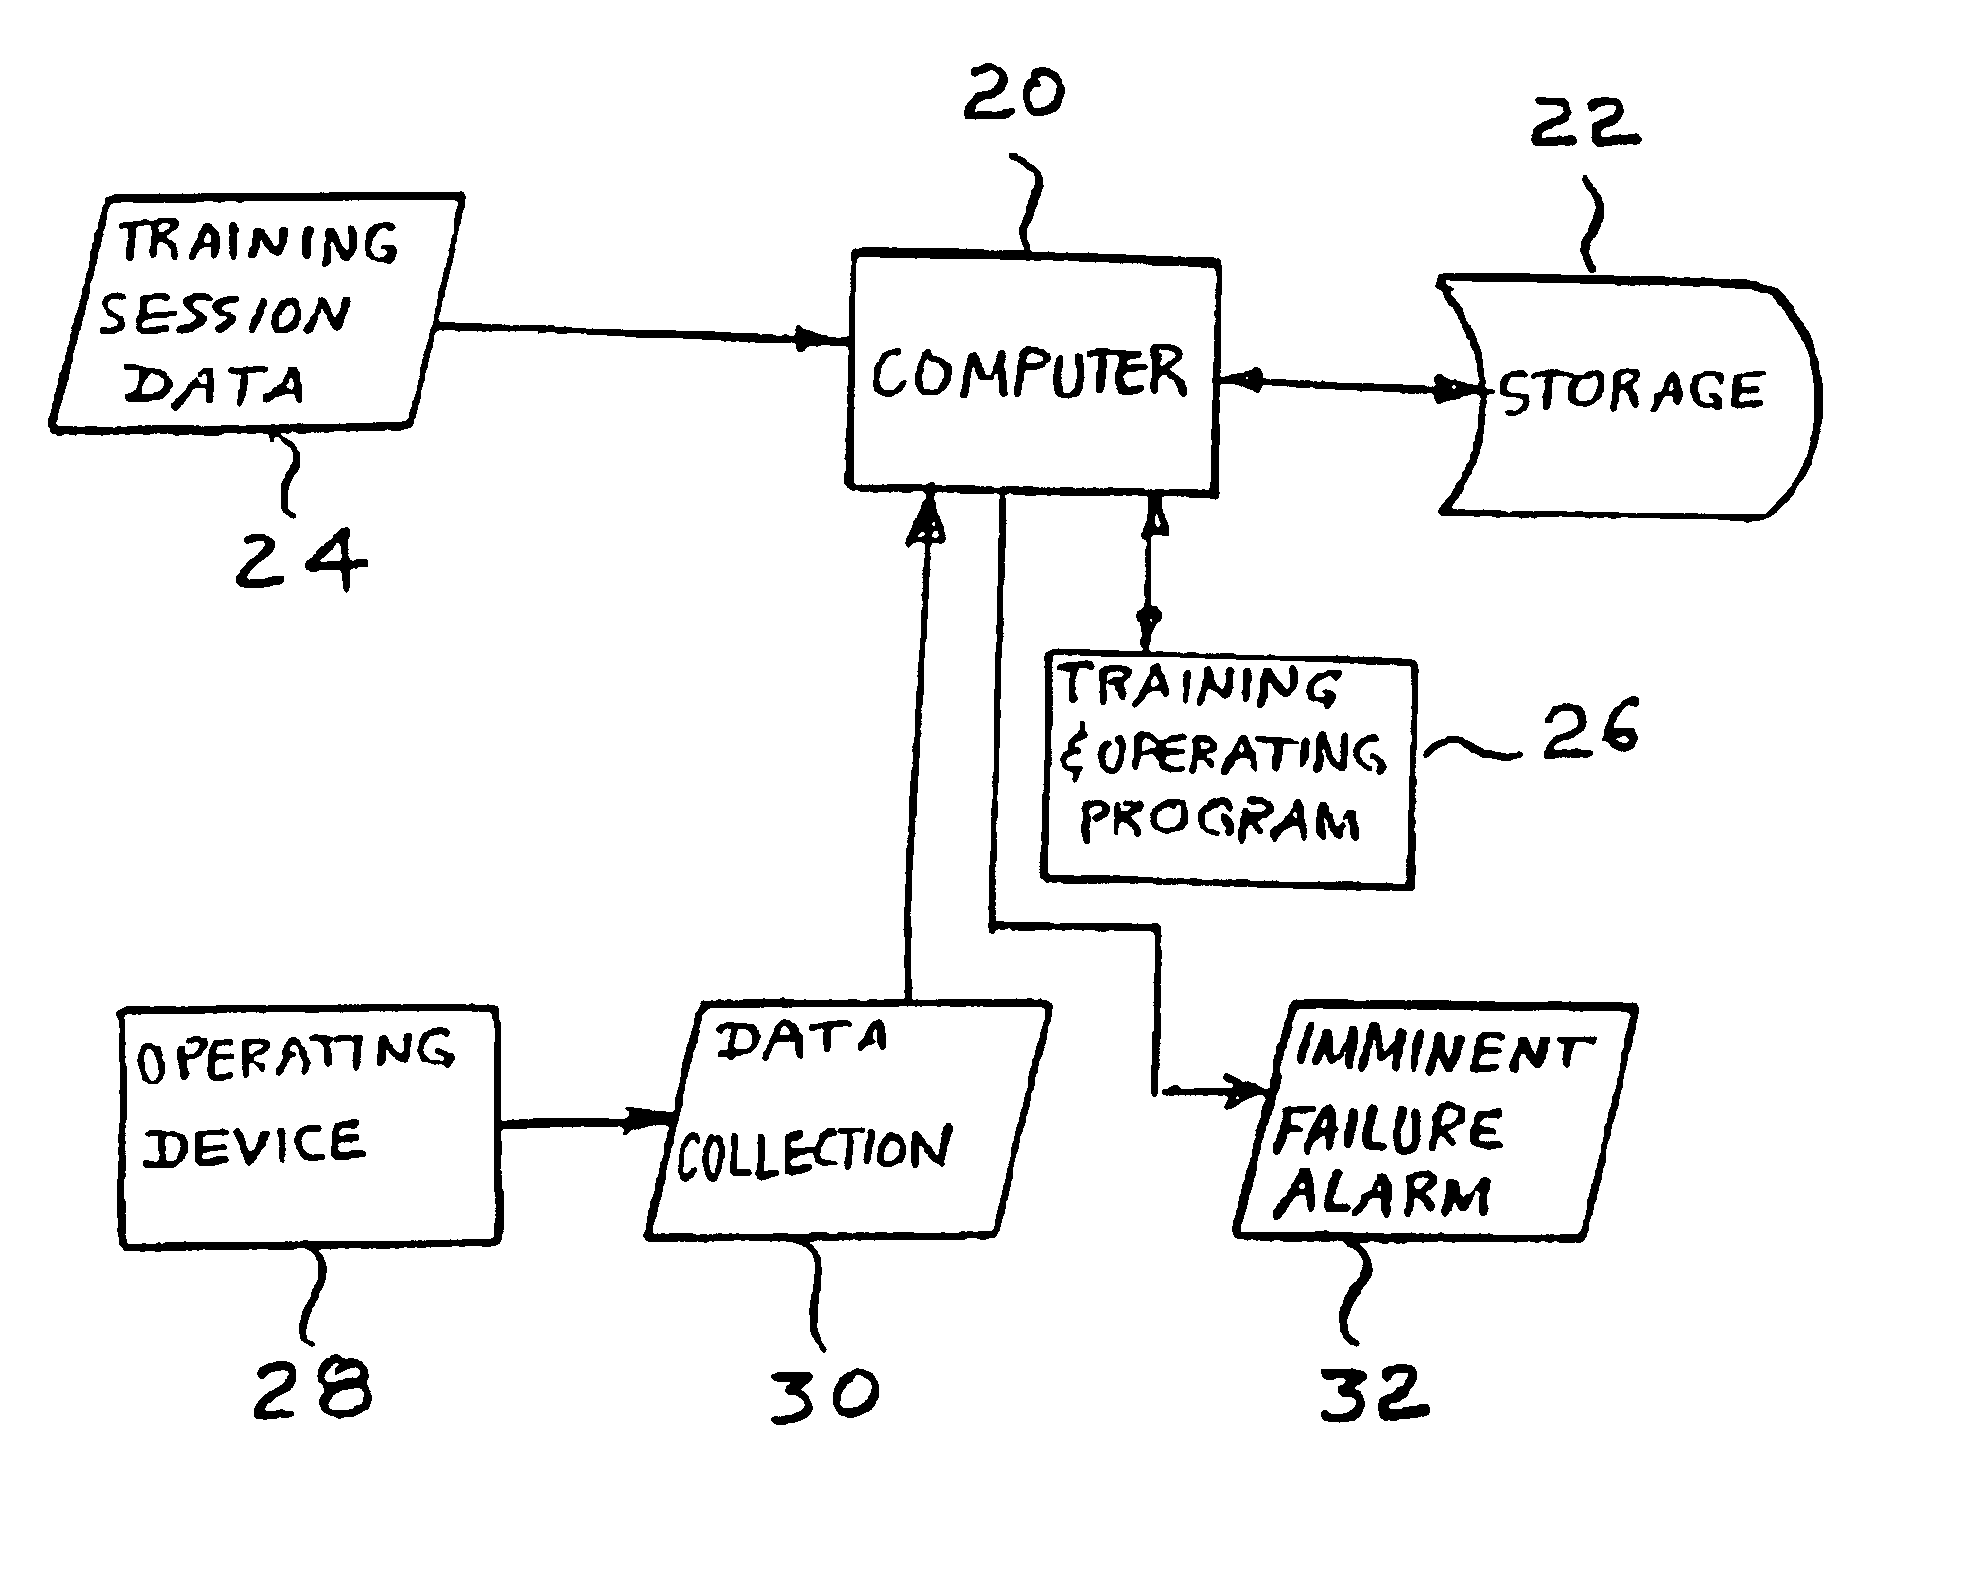 Method and apparatus for providing predictive maintenance of a device by using markov transition probabilities